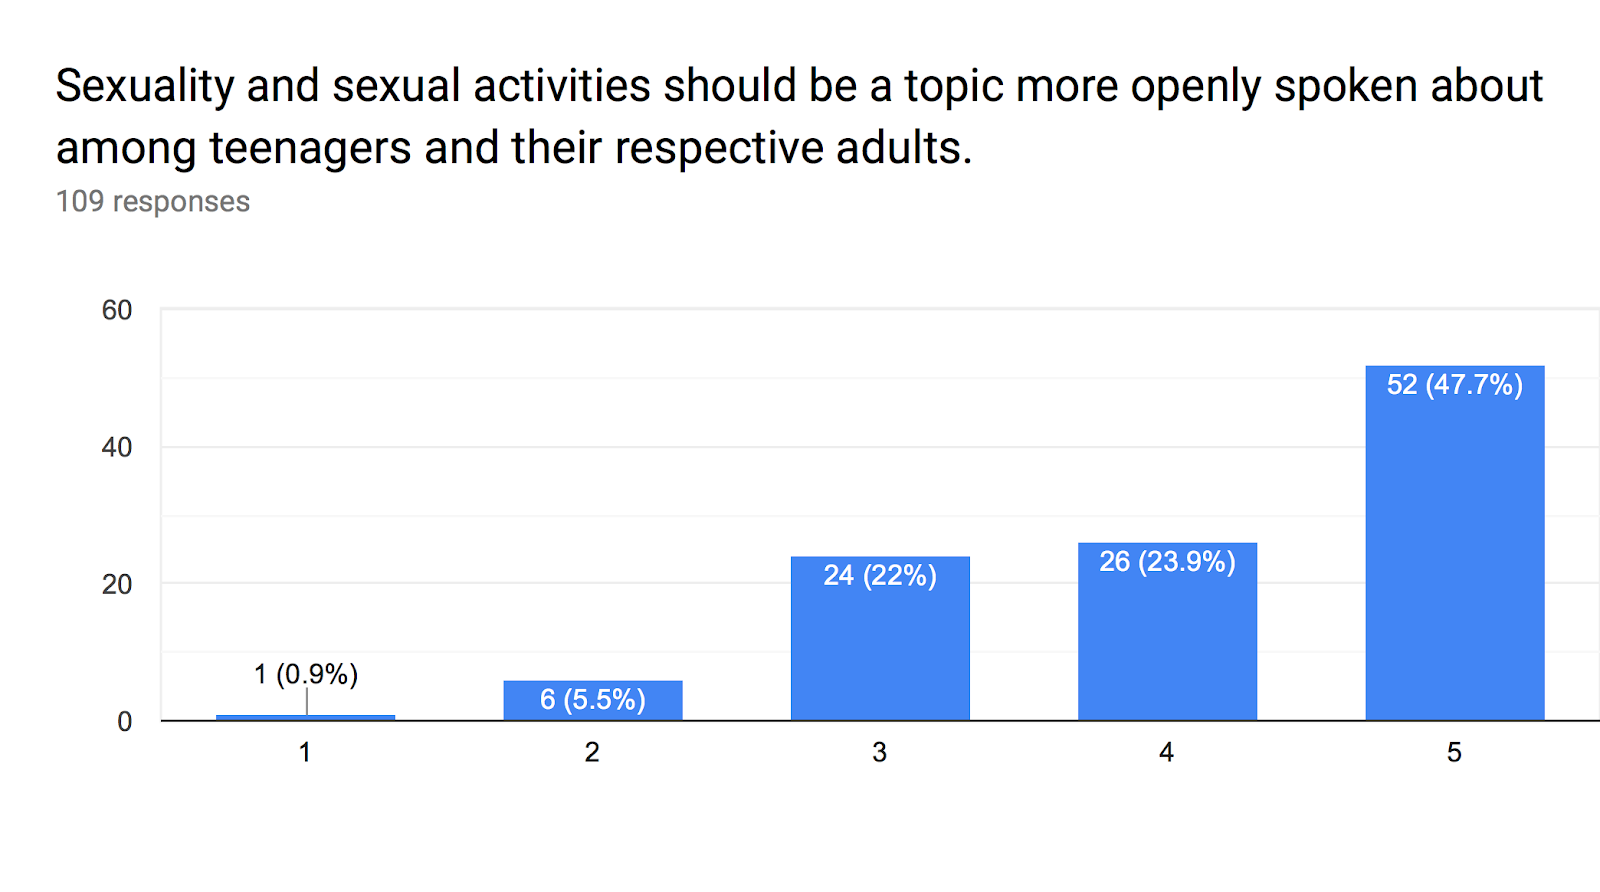 Forms response chart. Question title: Sexuality and sexual activities should be a topic more openly spoken about among teenagers and their respective adults. . Number of responses: 109 responses.